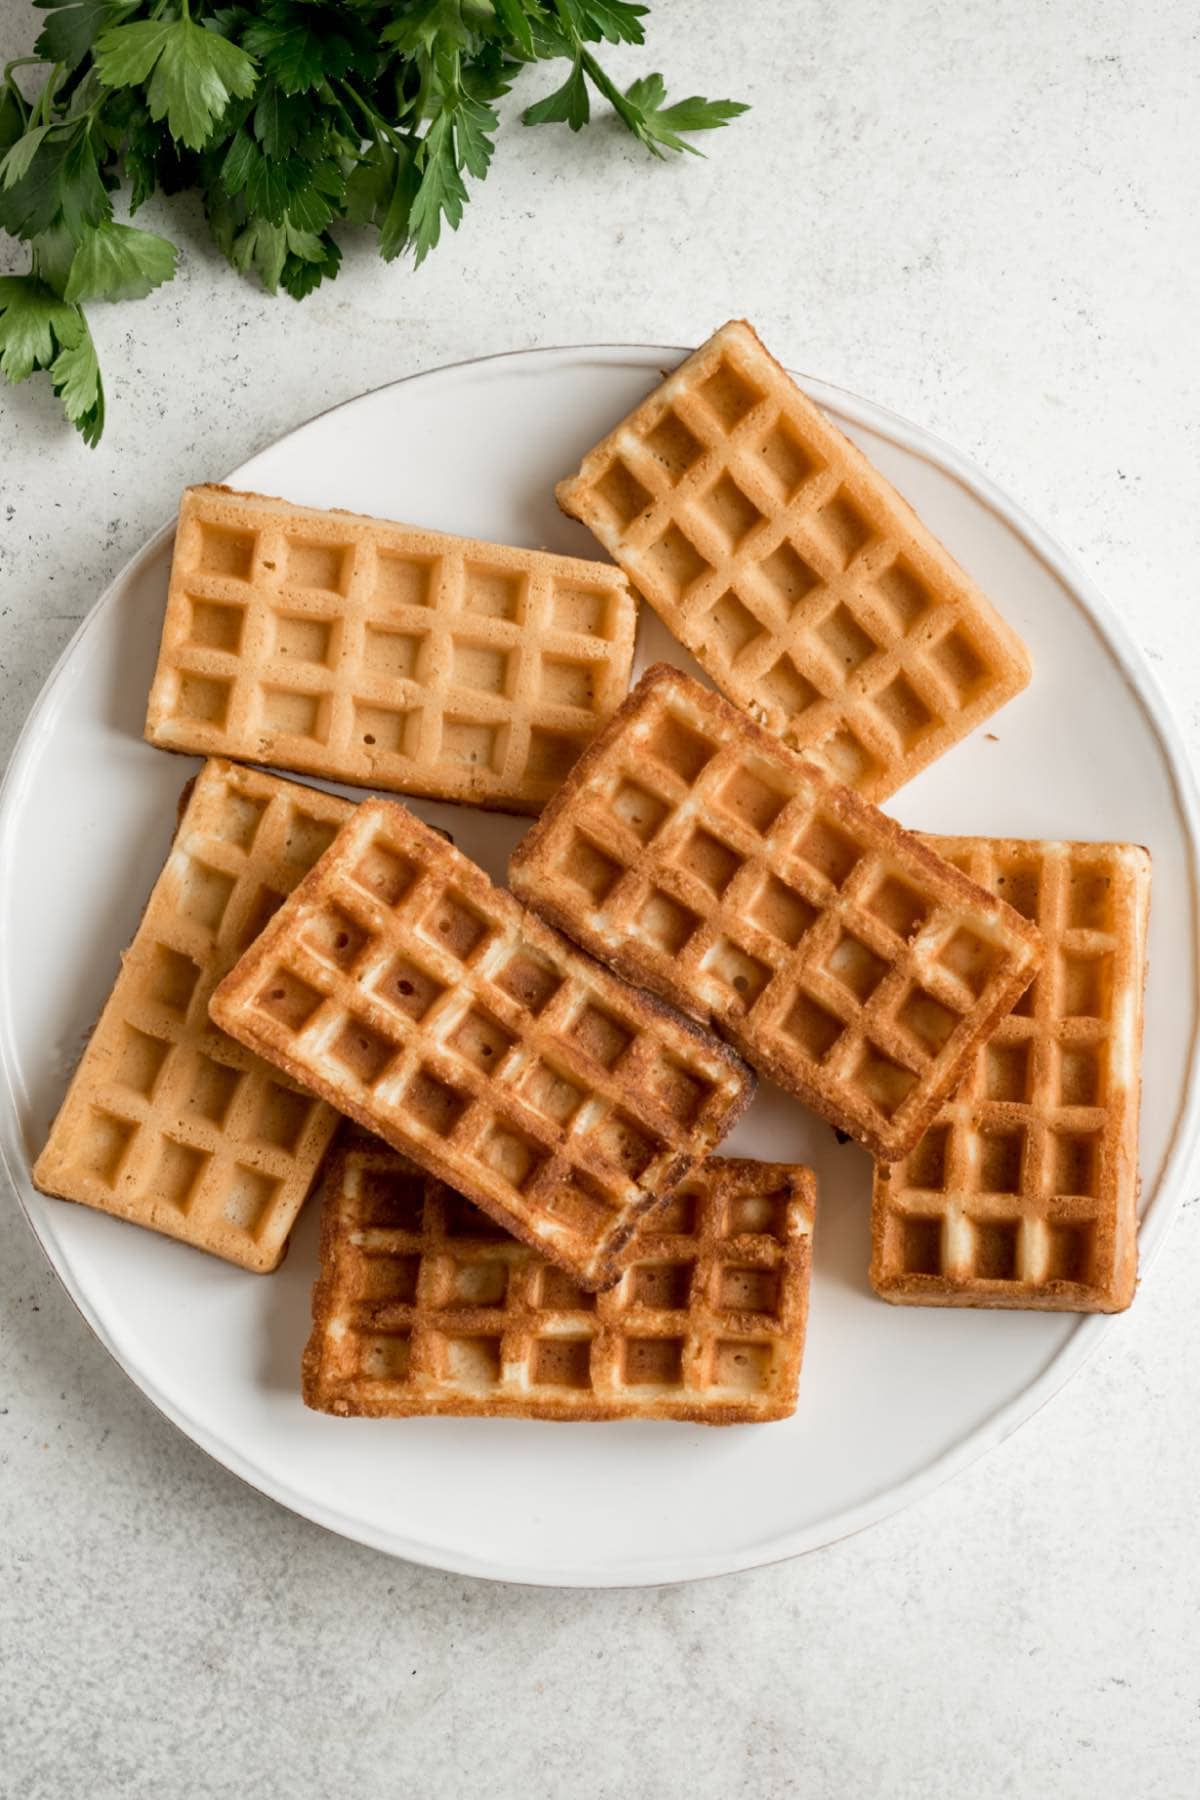 How To Store Chaffles